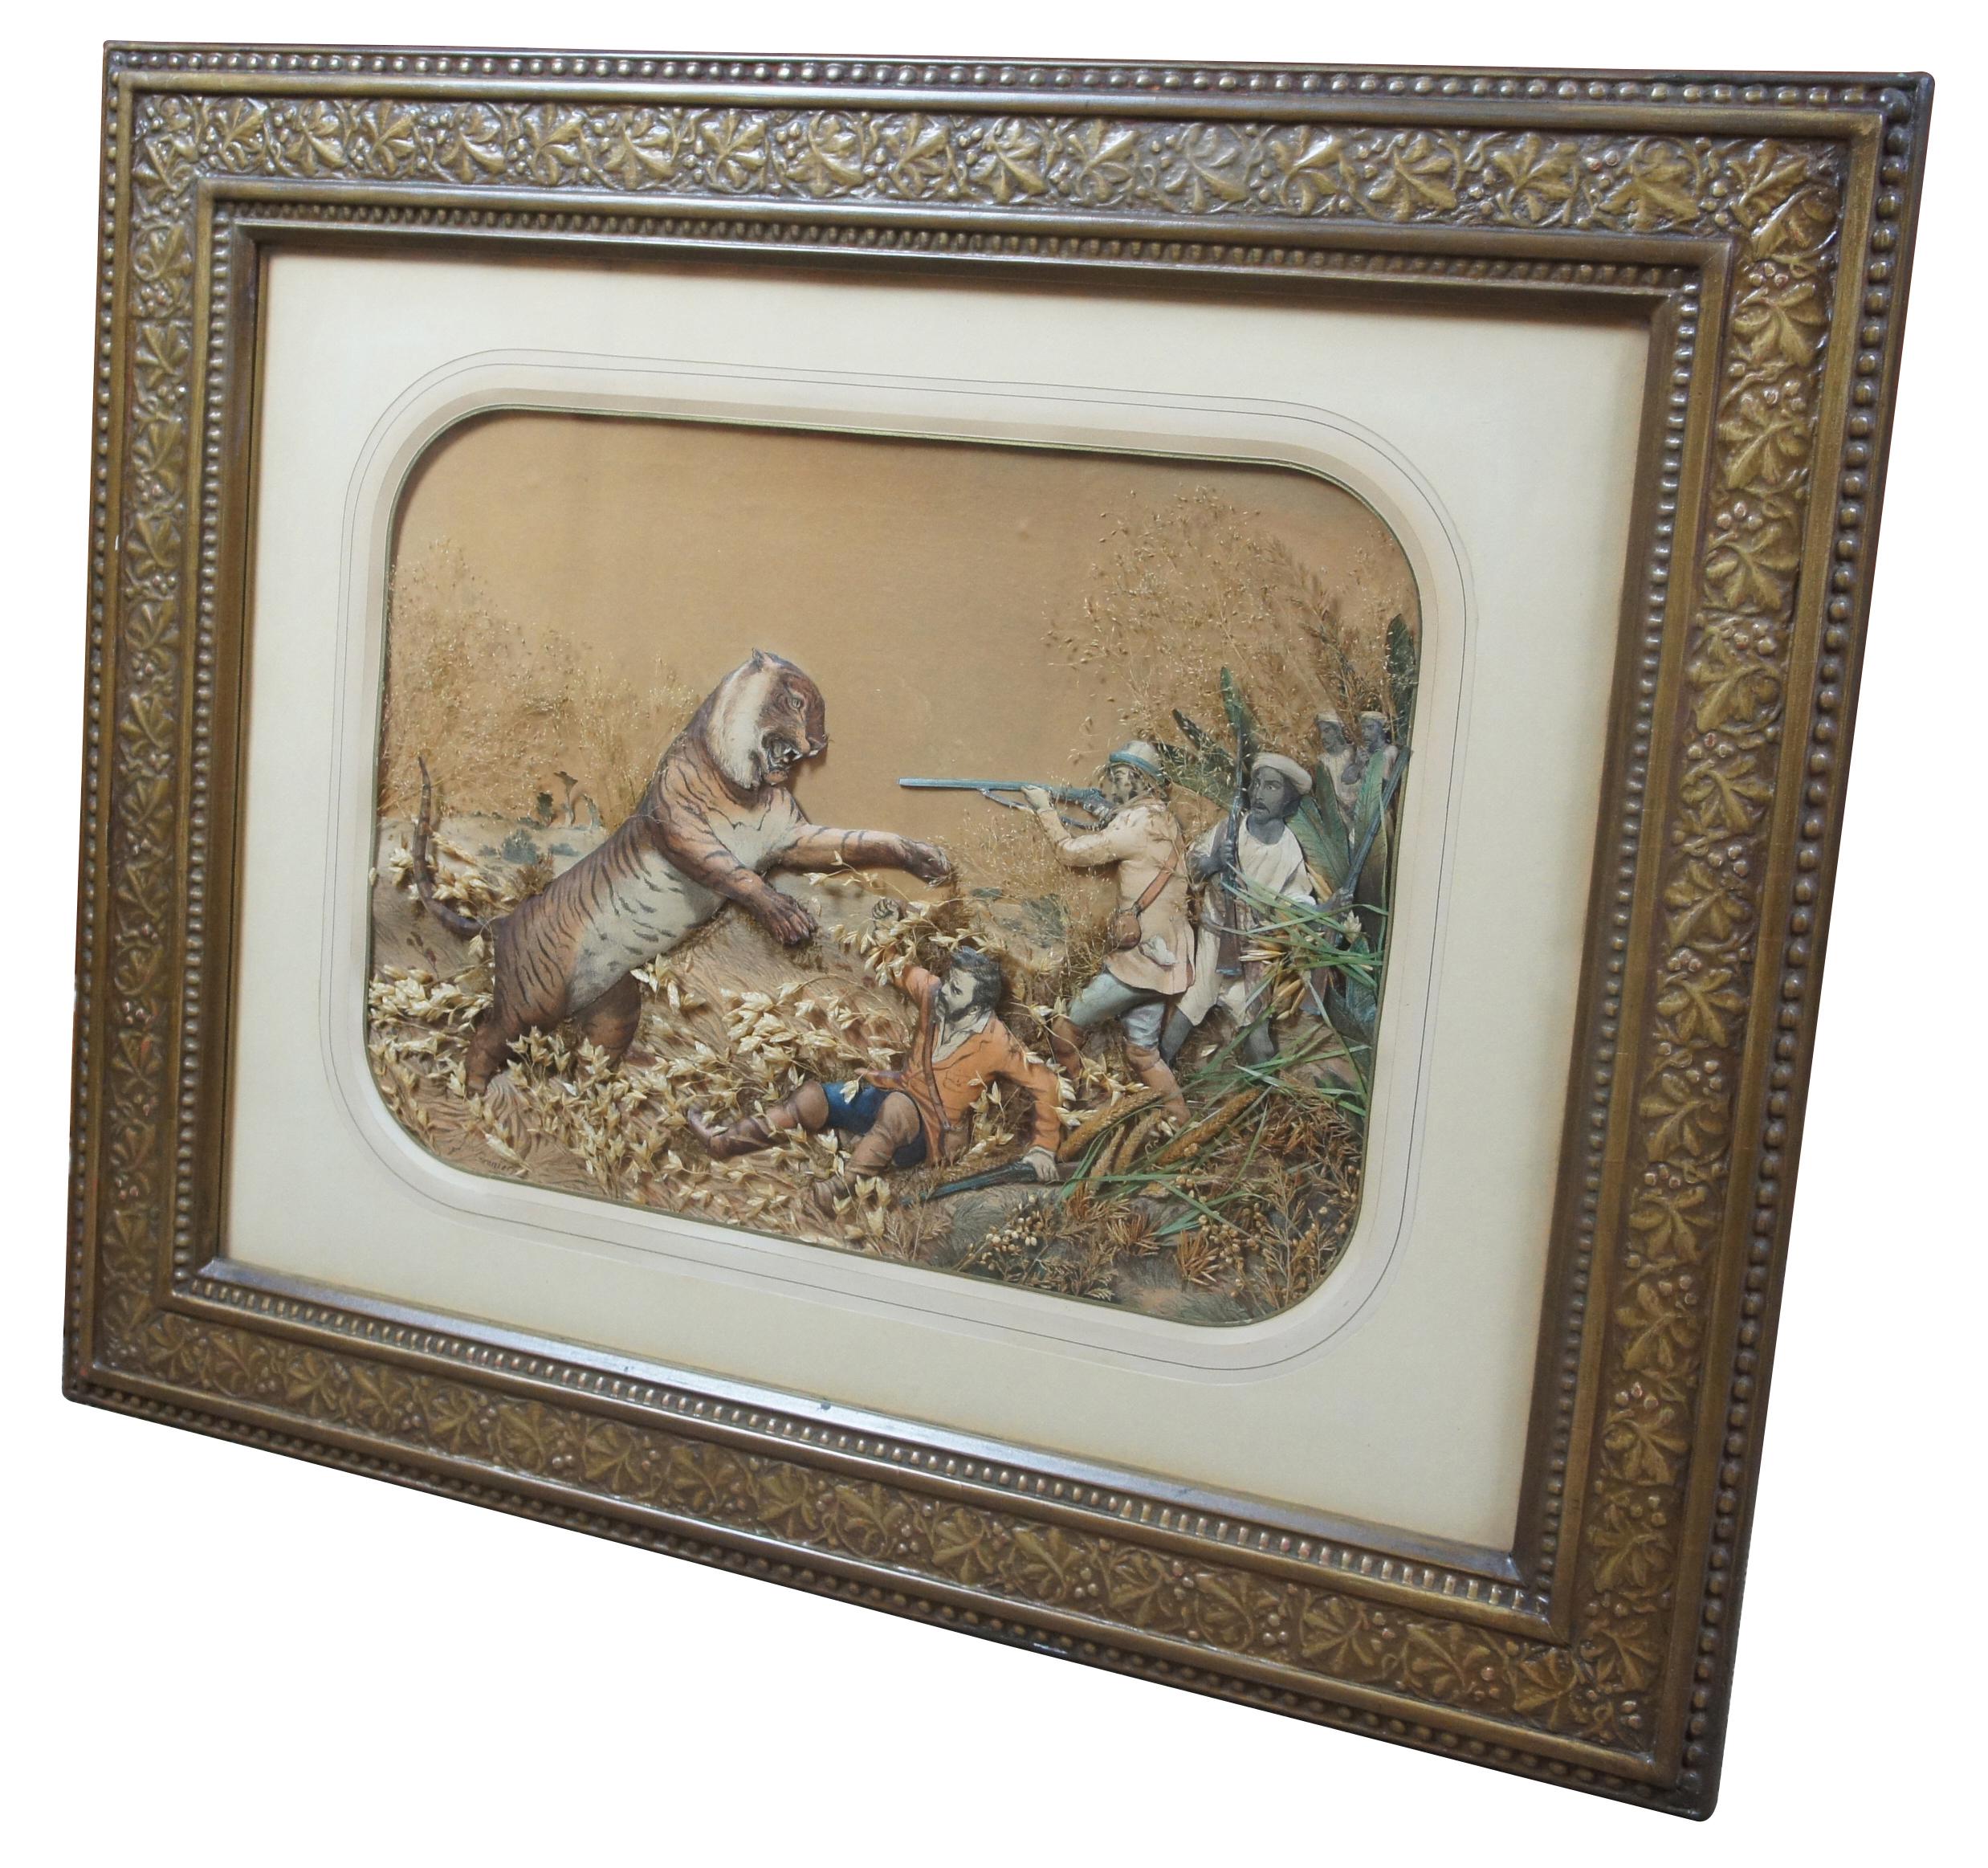 Antique mixed-media enhanced engraving artwork attributed to Francois Grenier. François GRENIER b. 1793-1867. This work features a hunting scene from India, framed shadowbox style, signed in stone lower left and titled on backside. La Chasse au